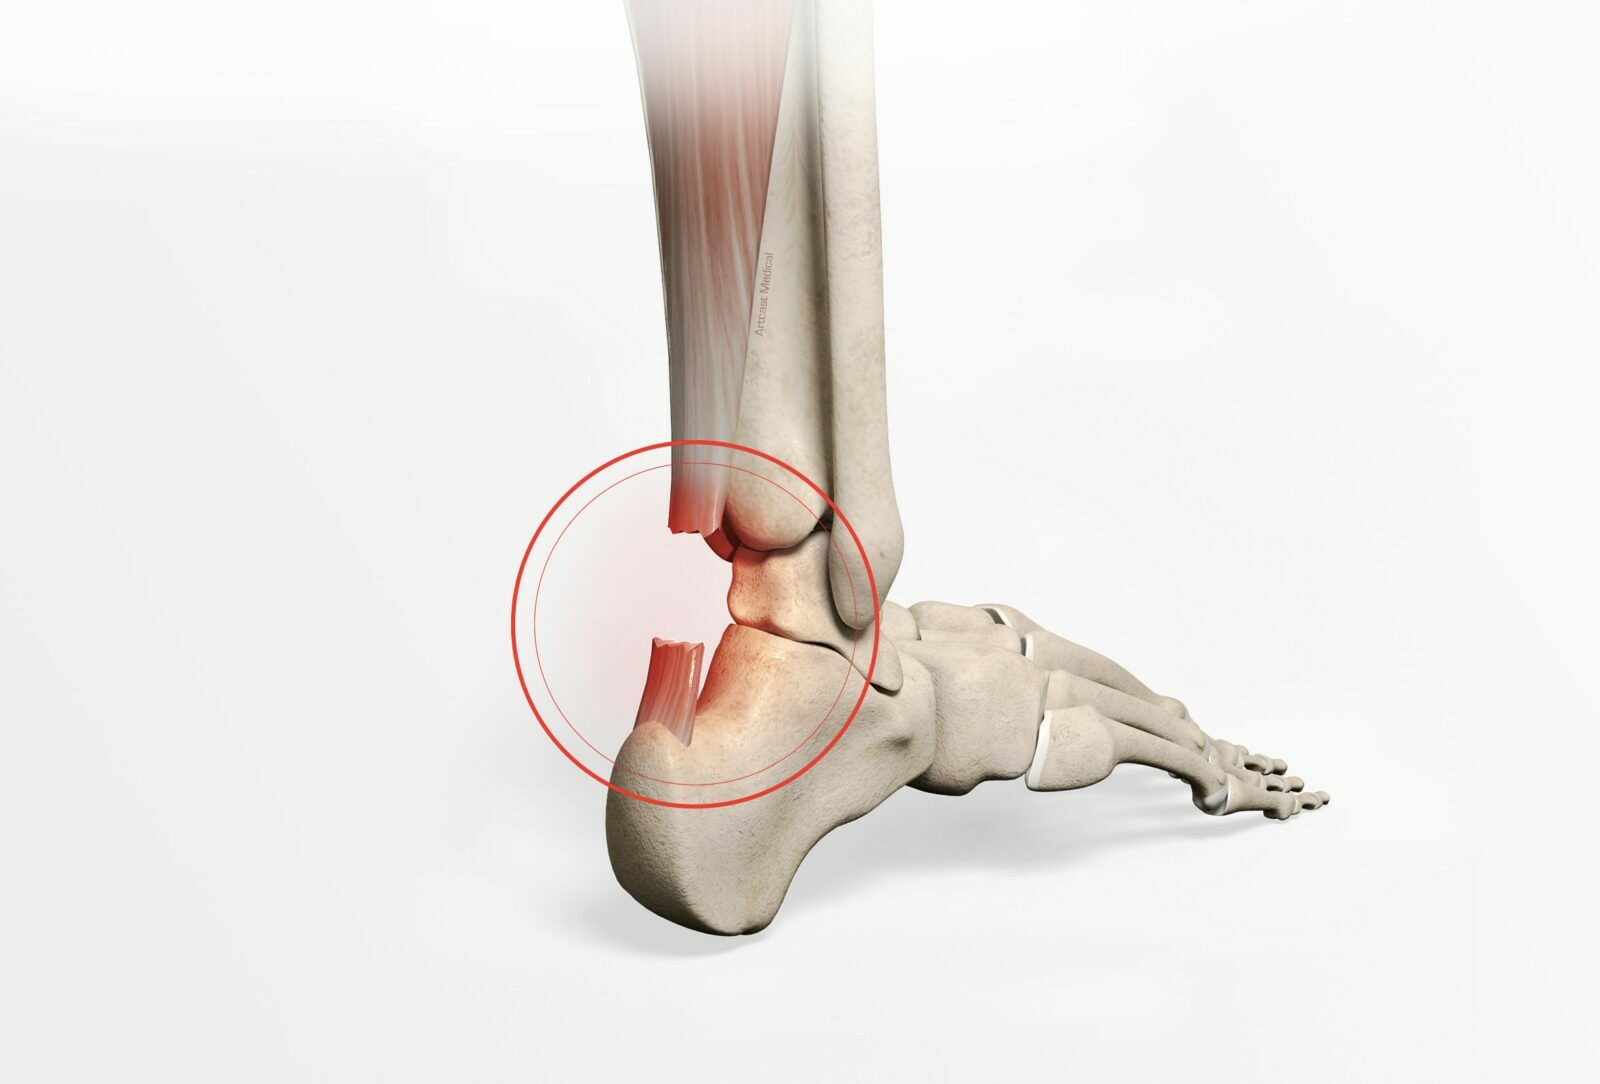 Torn Achilles Tendon Rupture or Achilles Tendonitis? [HOW TO TELL]